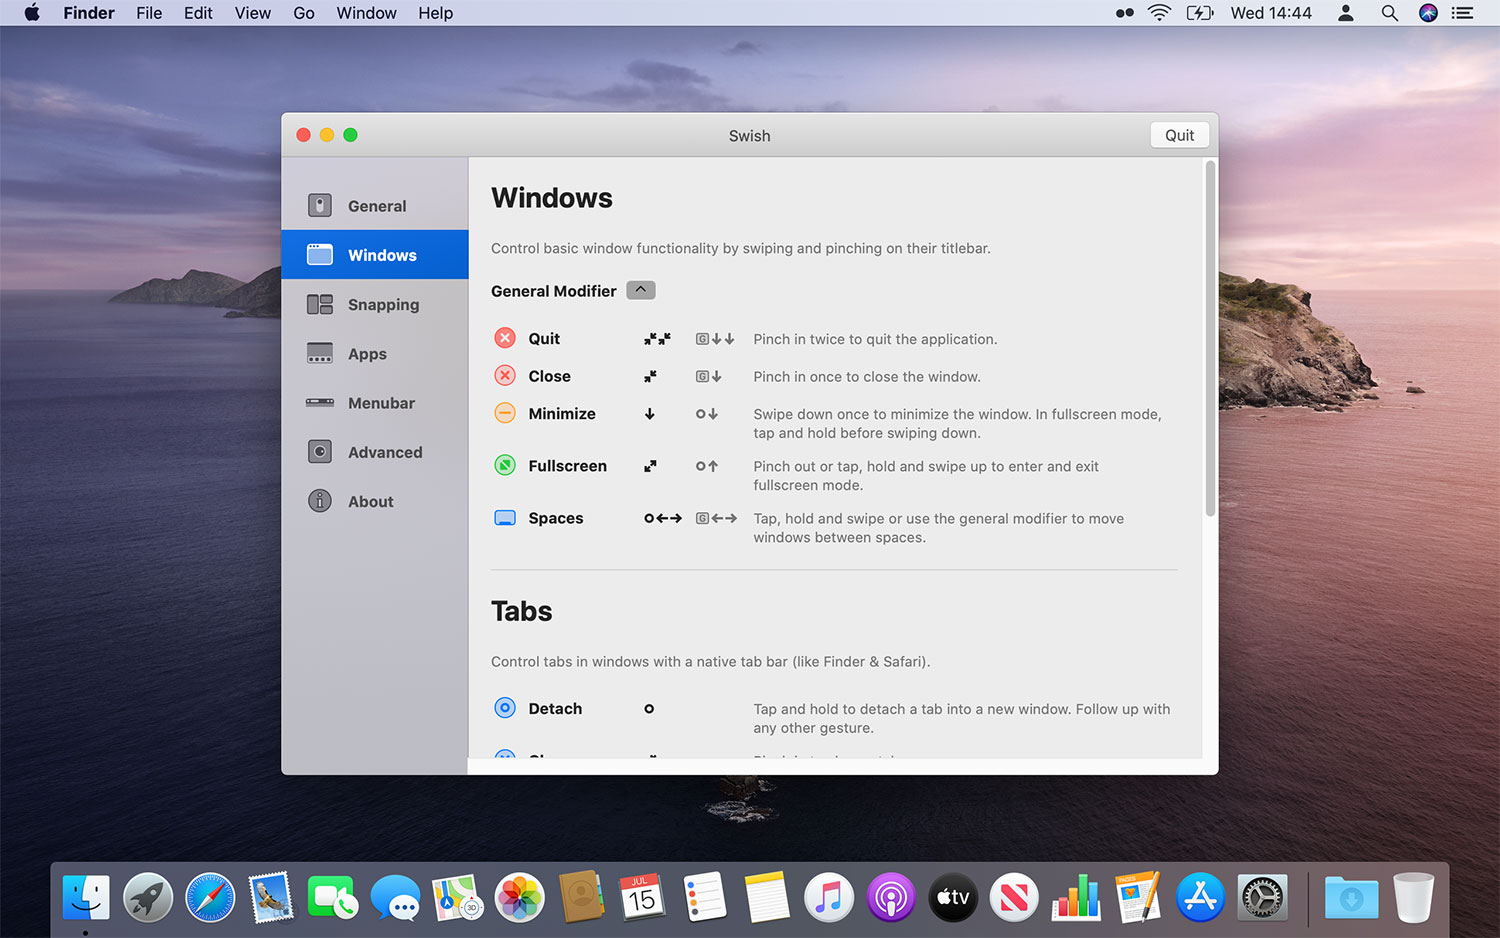 Launches a Minimal App Designed for OS X - MacStories